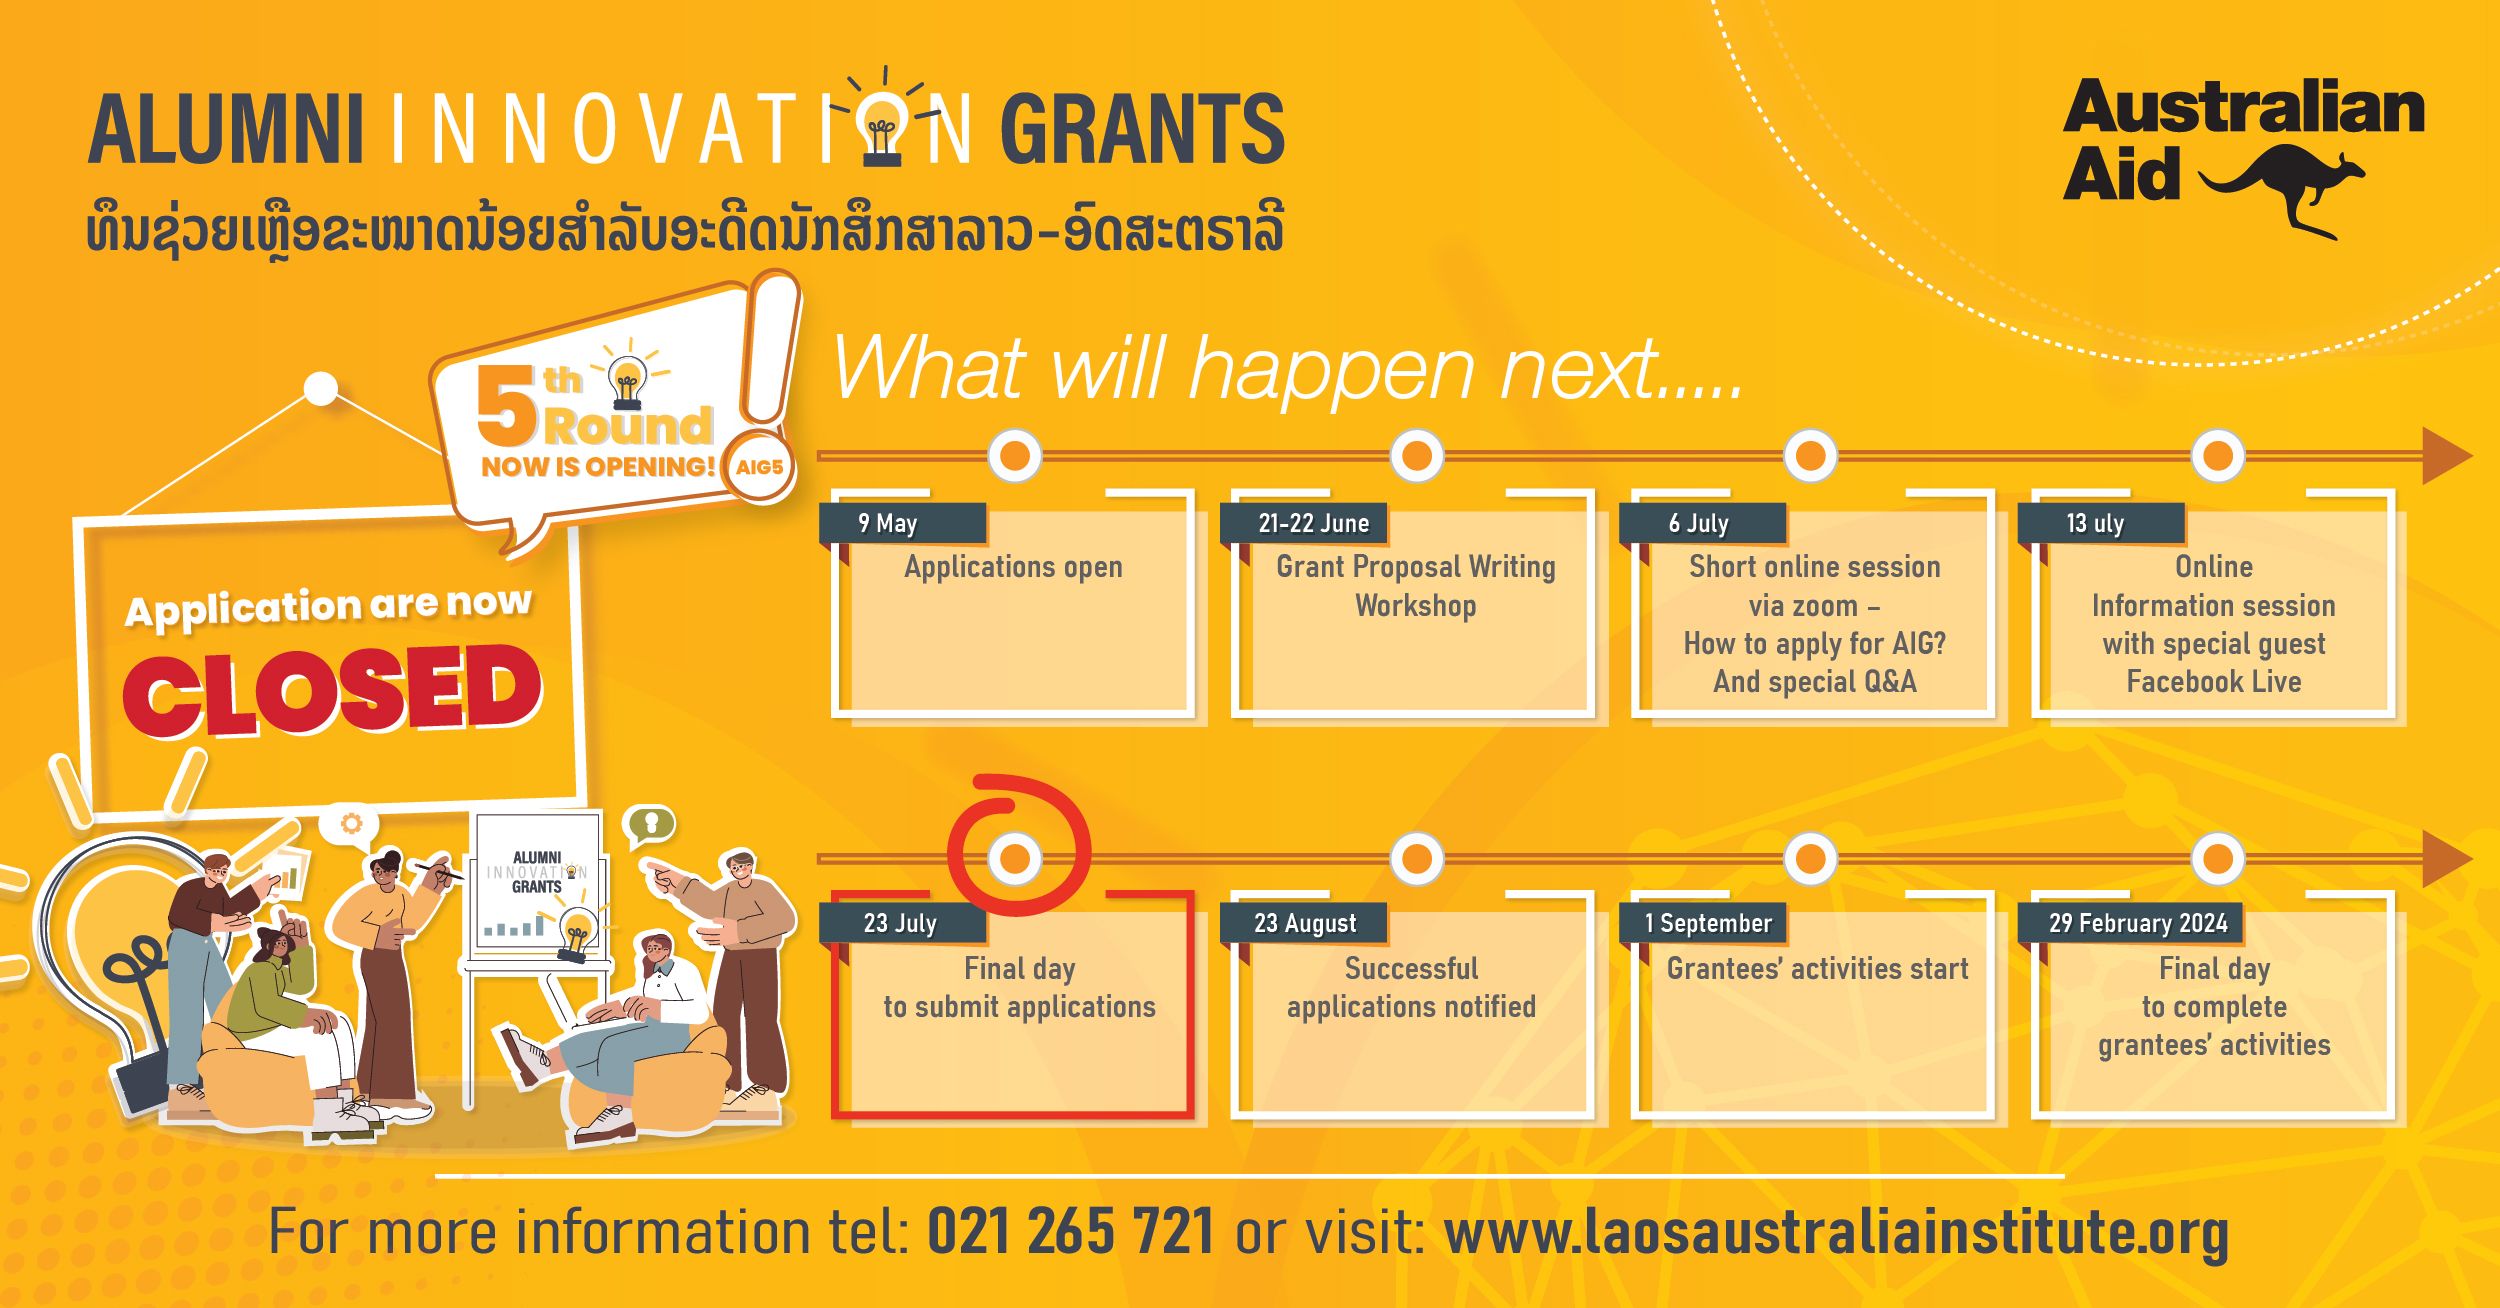 Applications for #AlumniInnovationGrants round 5 are now CLOSED